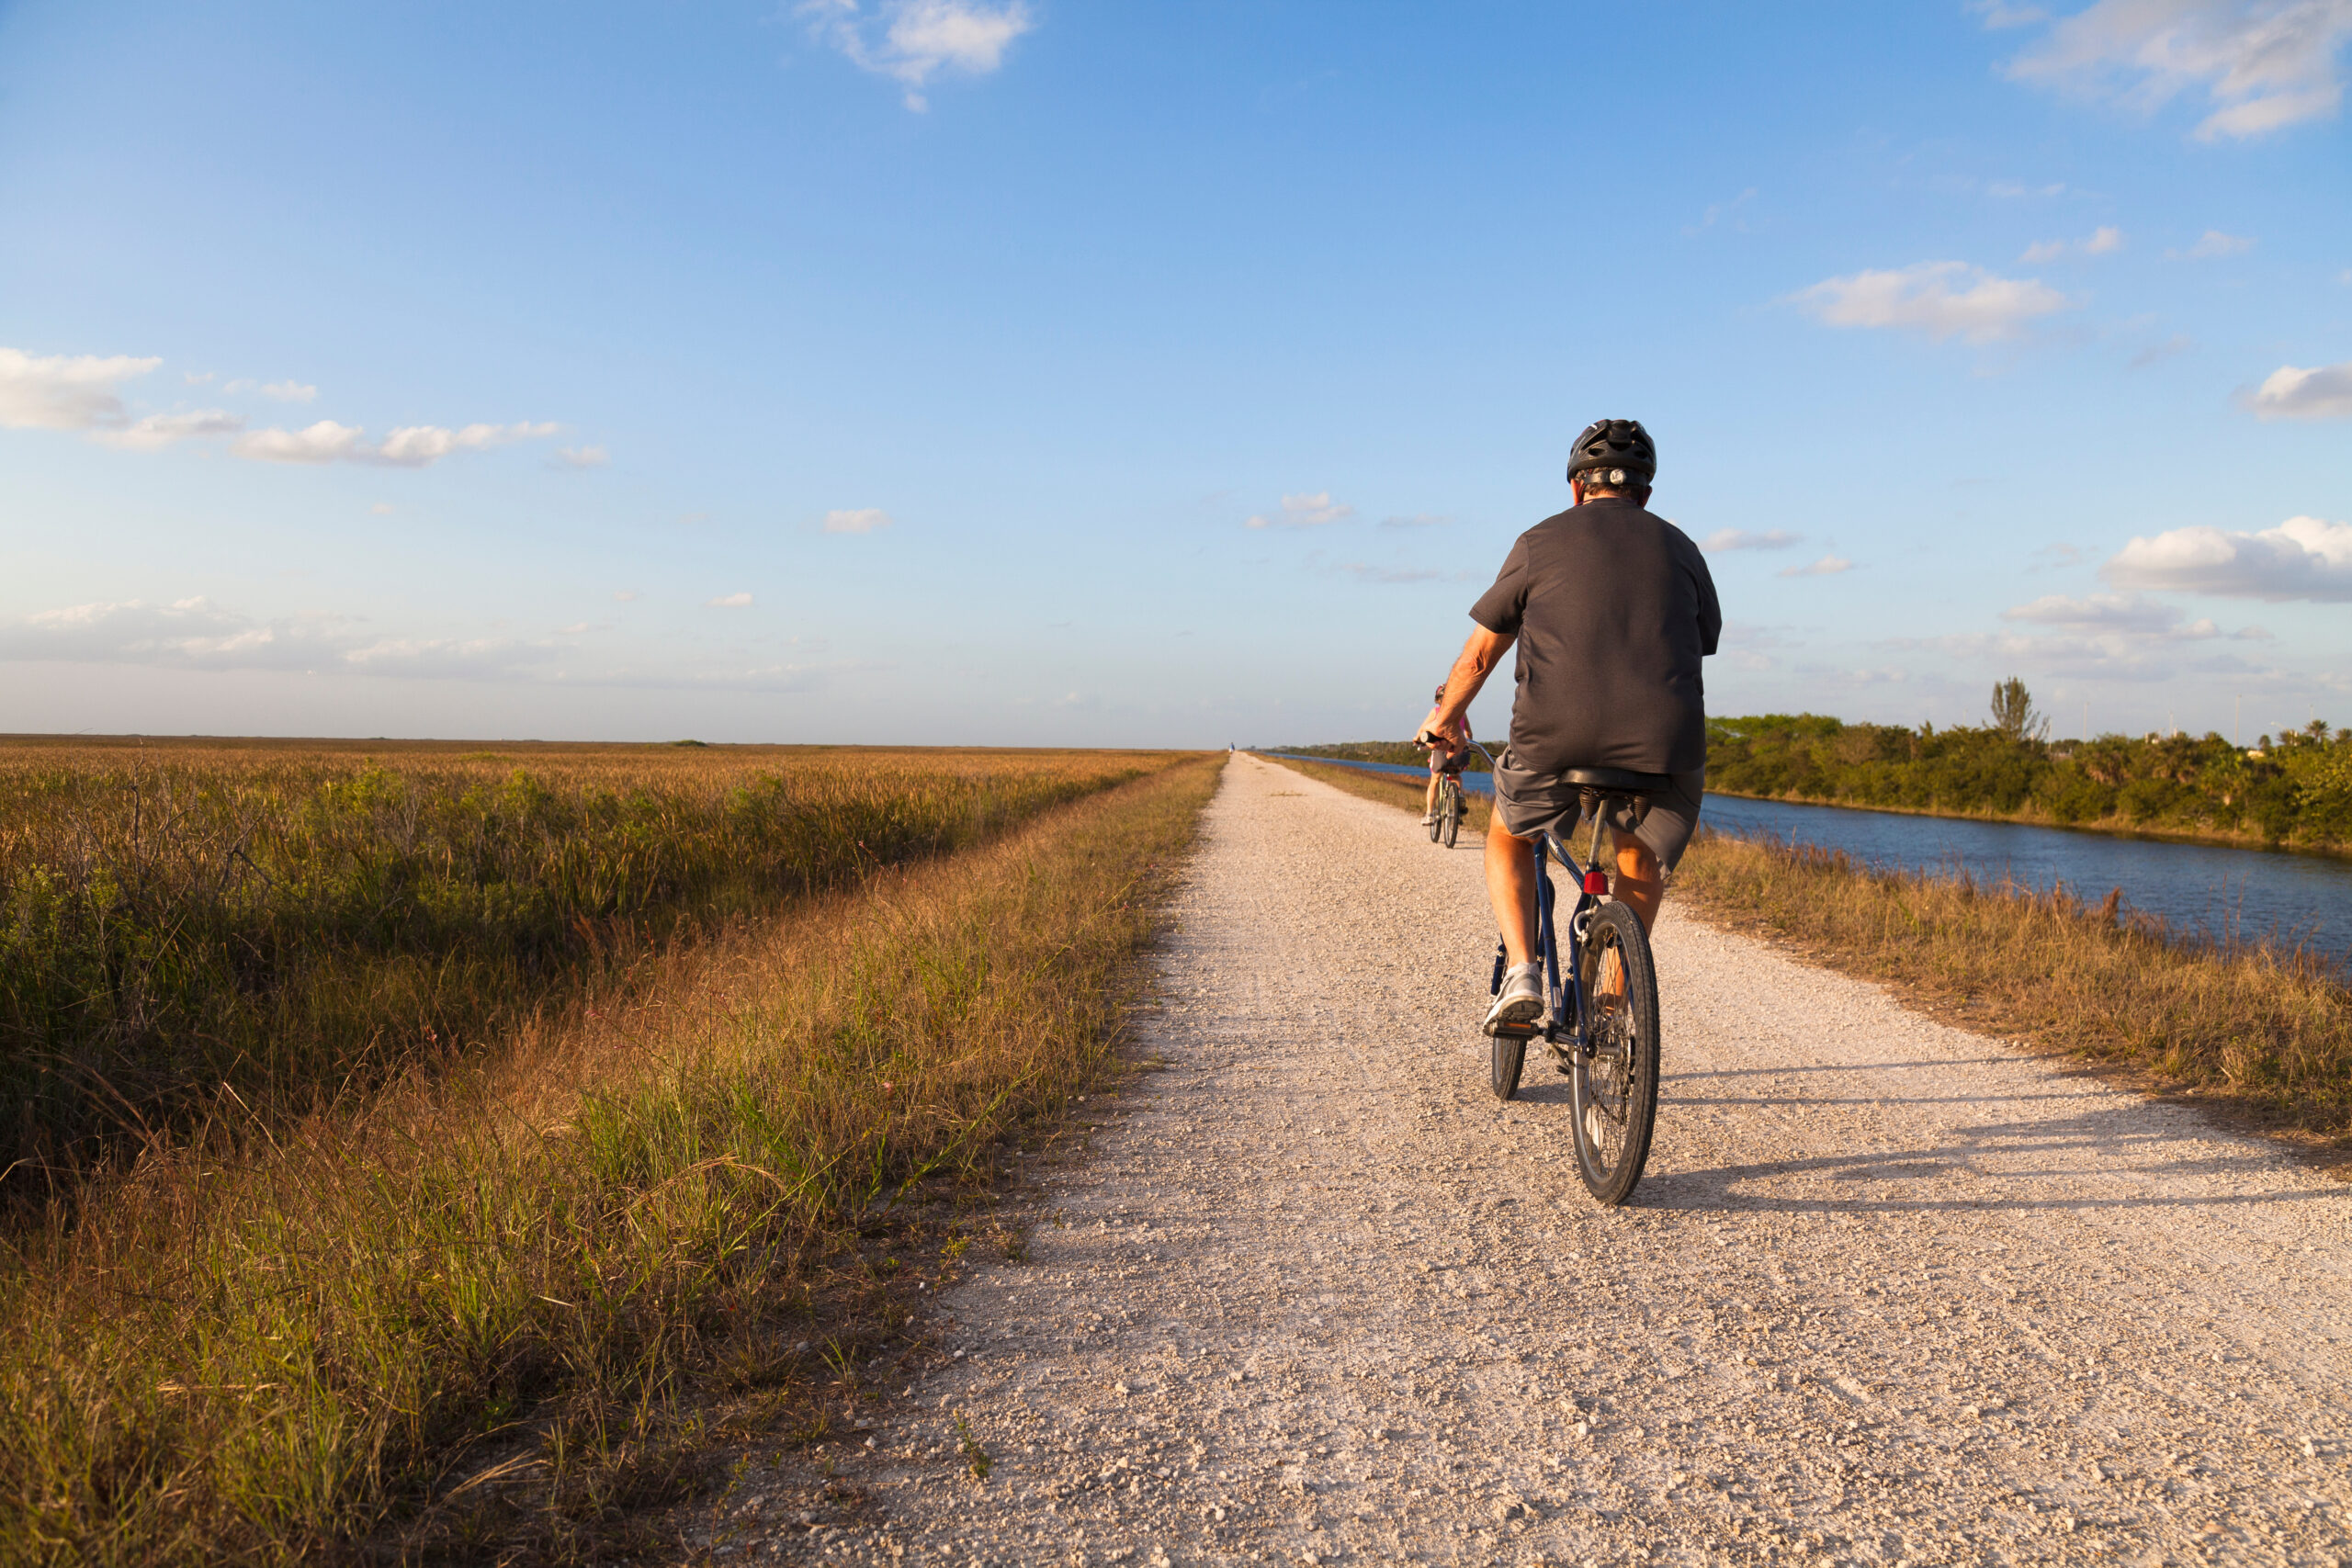 Retired man biking on a path next to a river and plains in the Everglades National Park, Coral Springs, Florida.